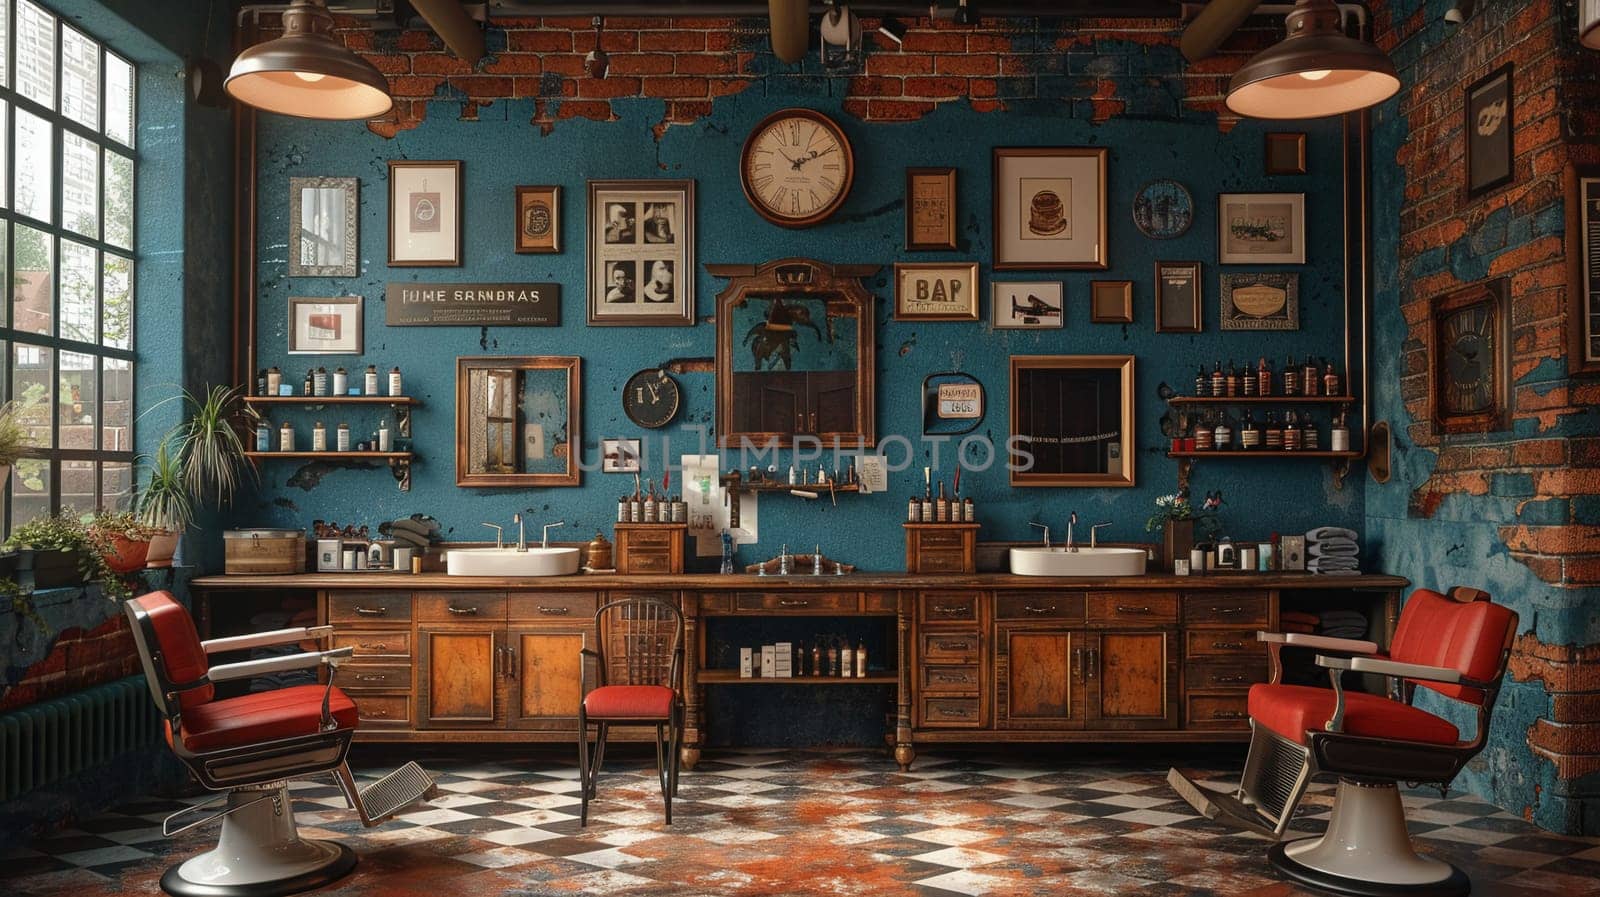 Vintage barbershop interior with classic chairs and nostalgic decor